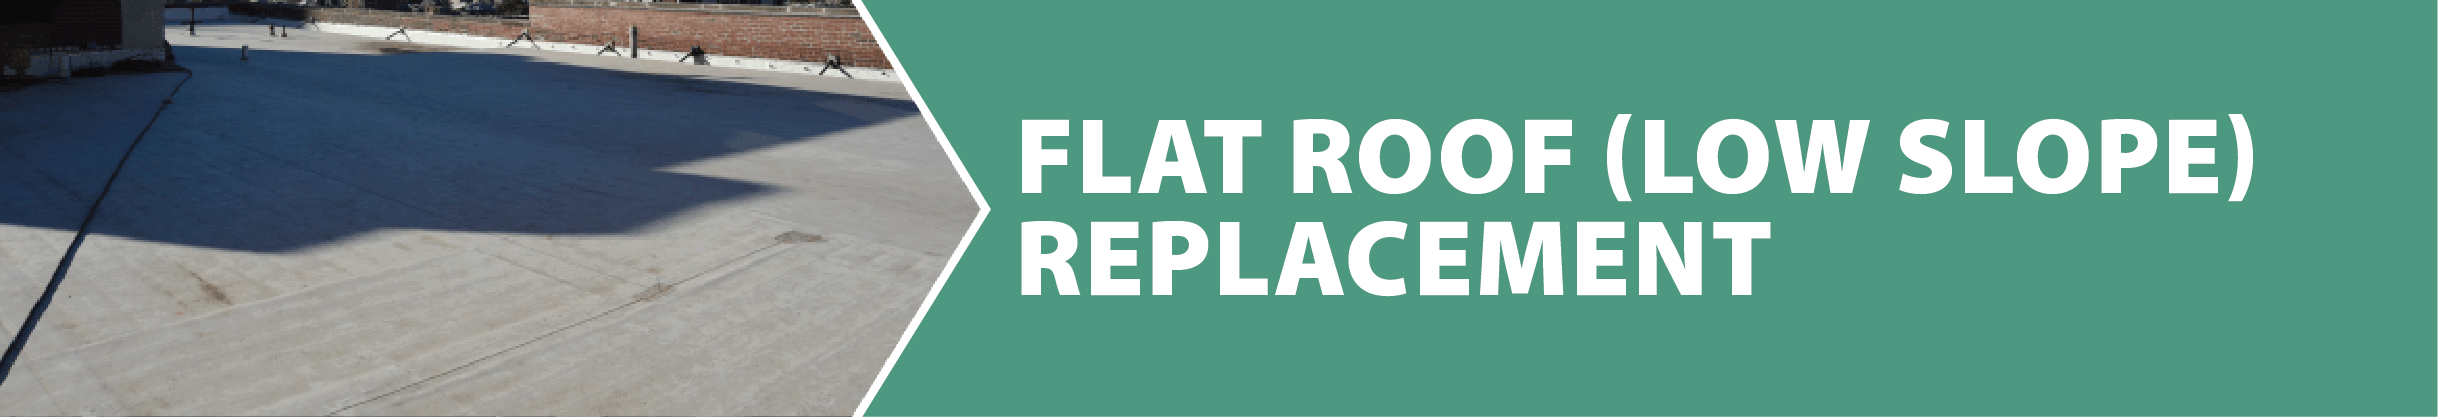 Flat Roof Replacement Title